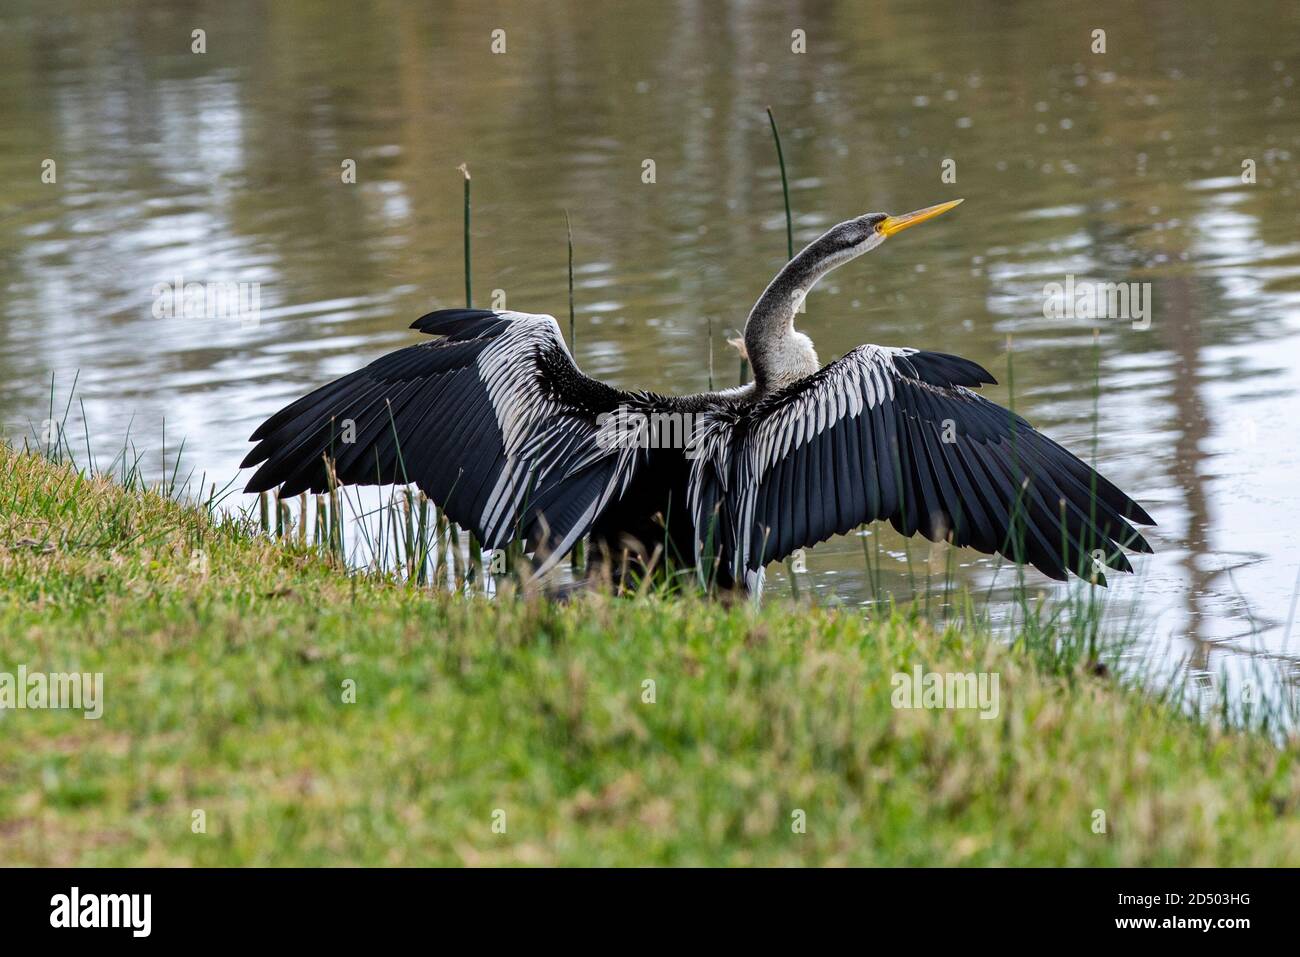 Australasian darter (Anhinga novaehollandiae) bird drying wings after feeding on the banks of the Murray River, New South Wales, Australia Stock Photo